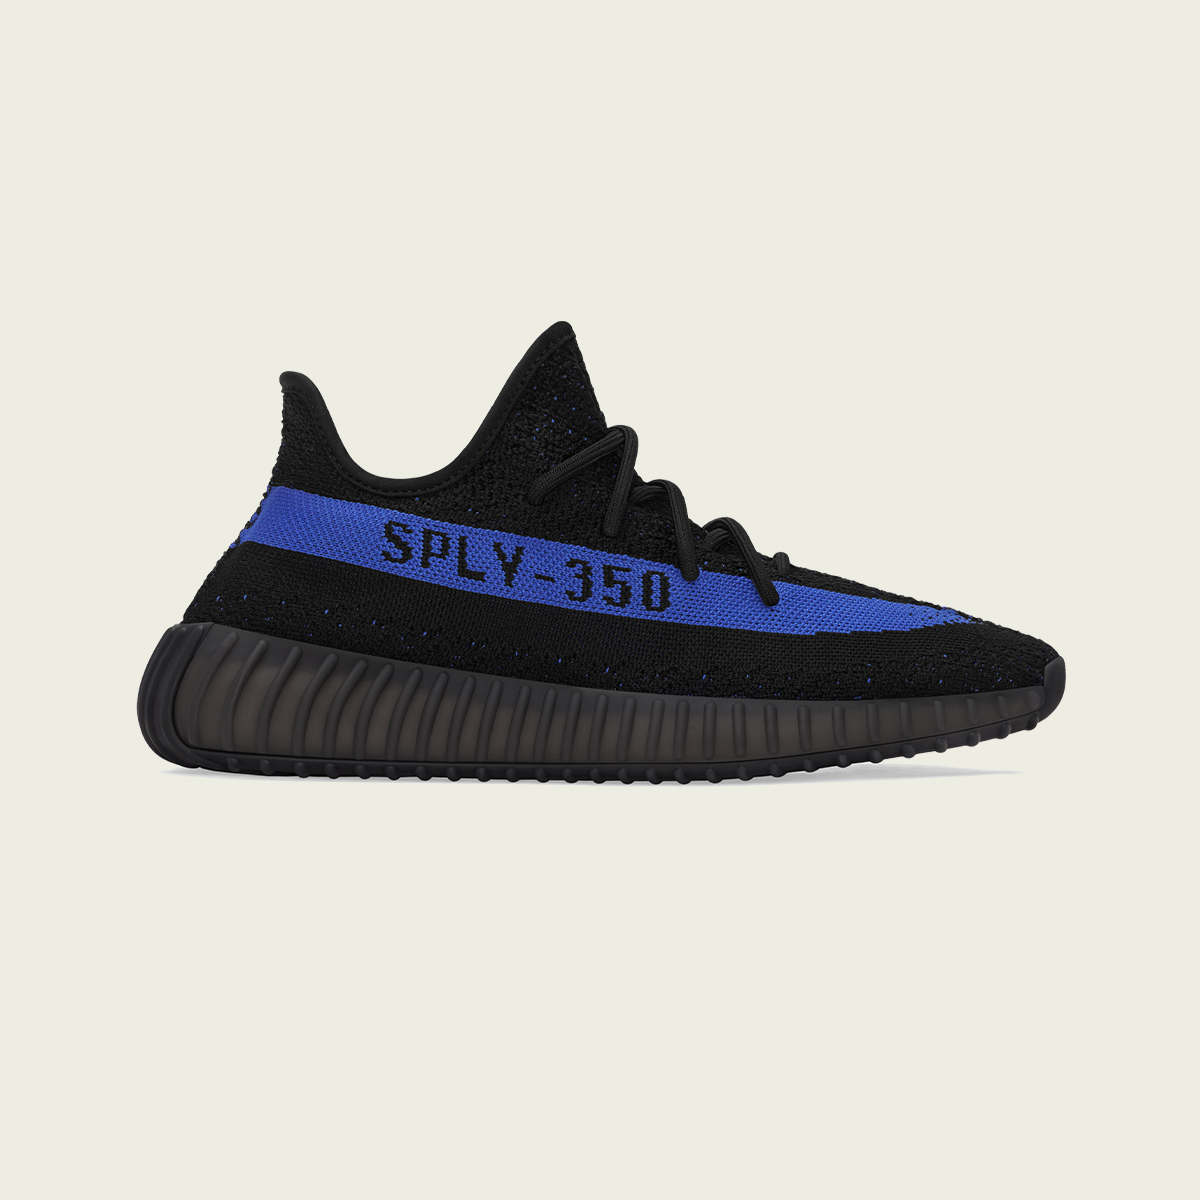 Locker on Twitter: "#YEEZY 350 V2 'DAZZLING BLUE' LAUNCHES FEBRUARY 26 IN MENS AND KIDS SIZES. https://t.co/yMut9o9yj4" / Twitter